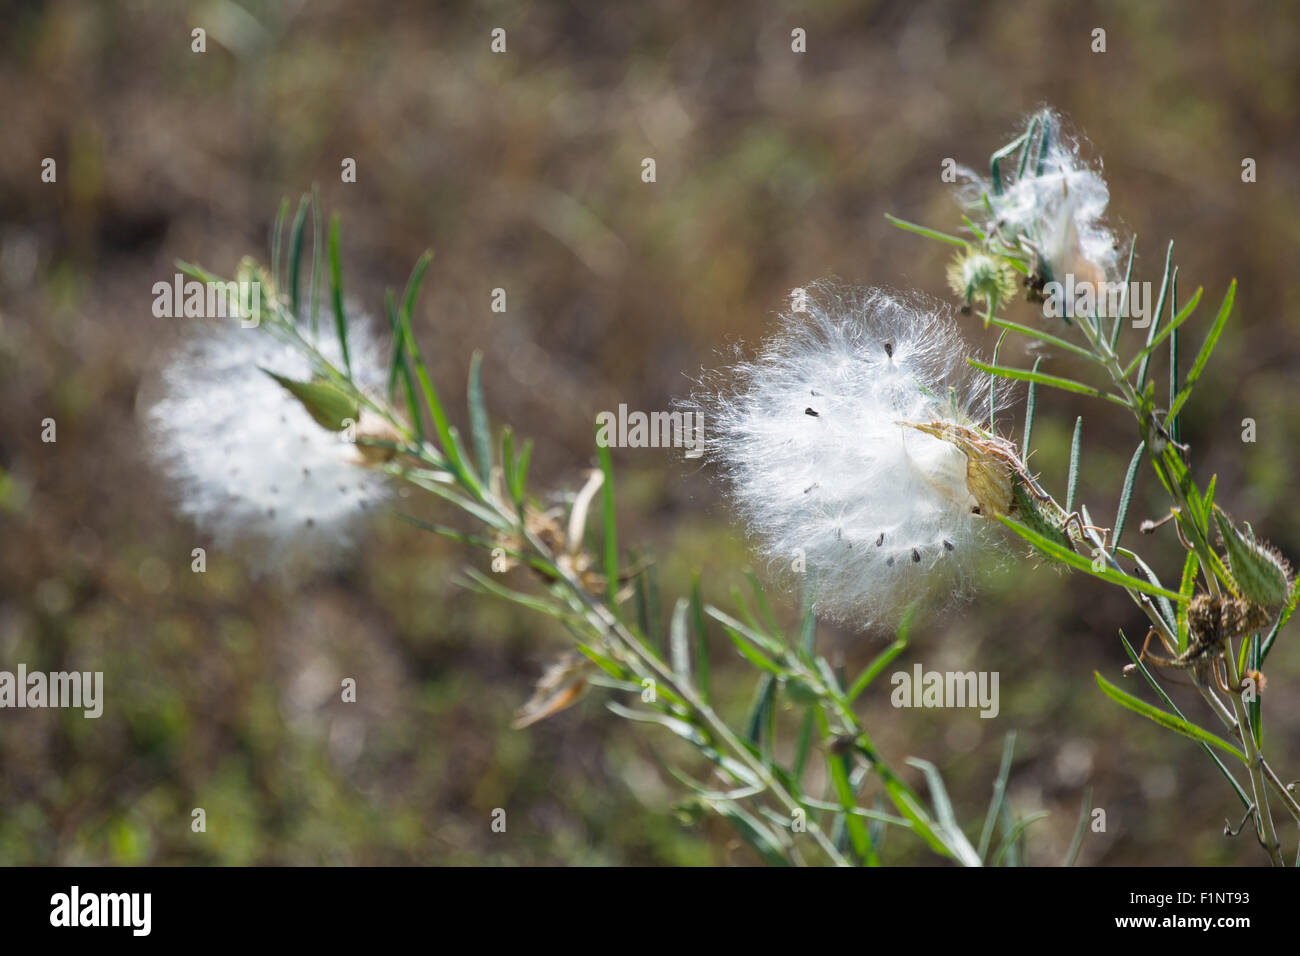 Seeds of the milkweed plant about to be dispersed by the wind Stock Photo